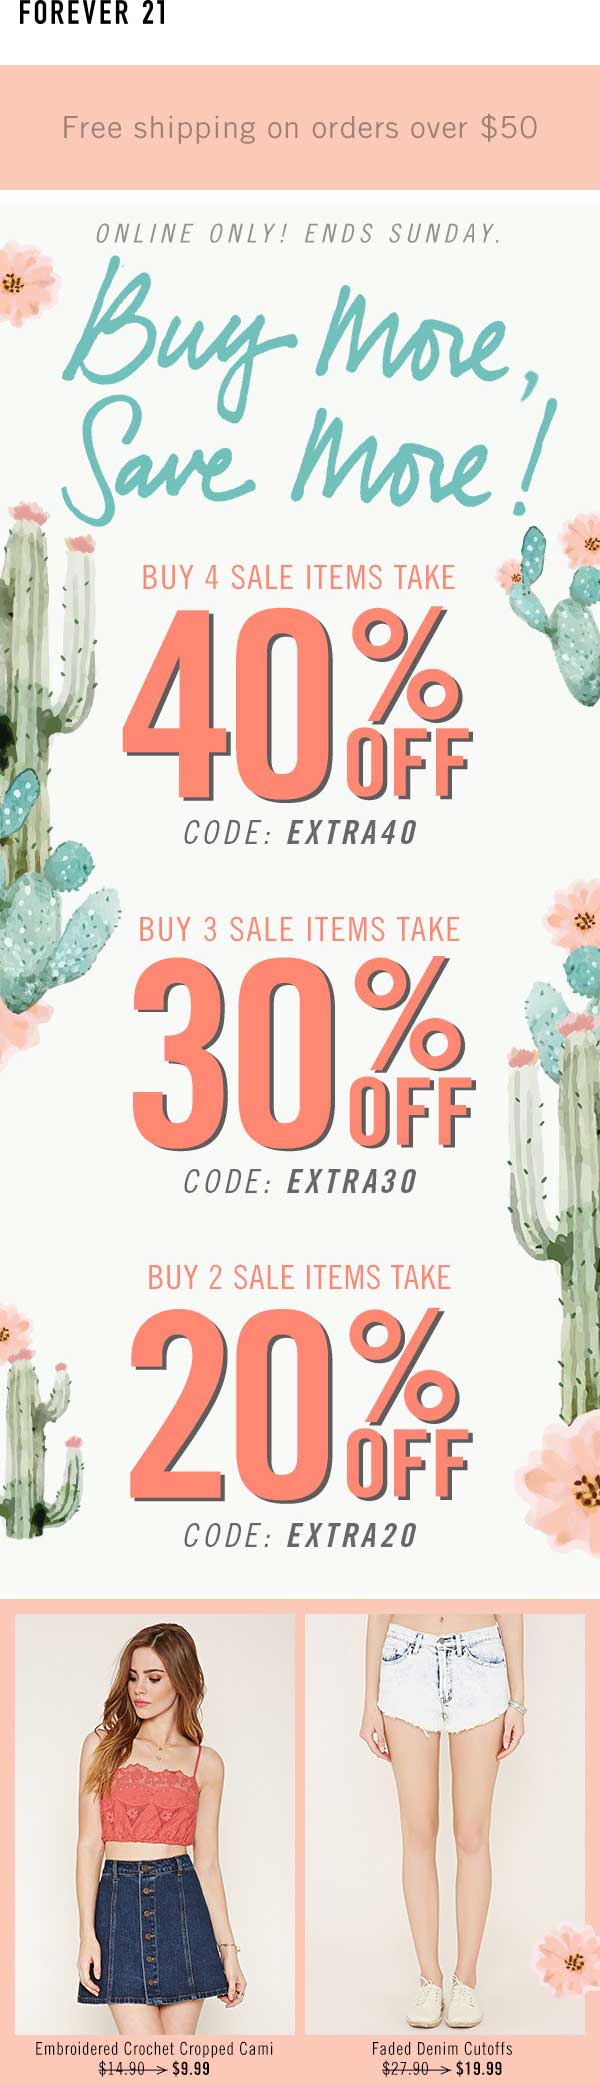 Forever 21 Coupon March 2024 20-40% off sale items online at Forever 21 via promo codes EXTRA20, EXTRA30 & EXTRA40